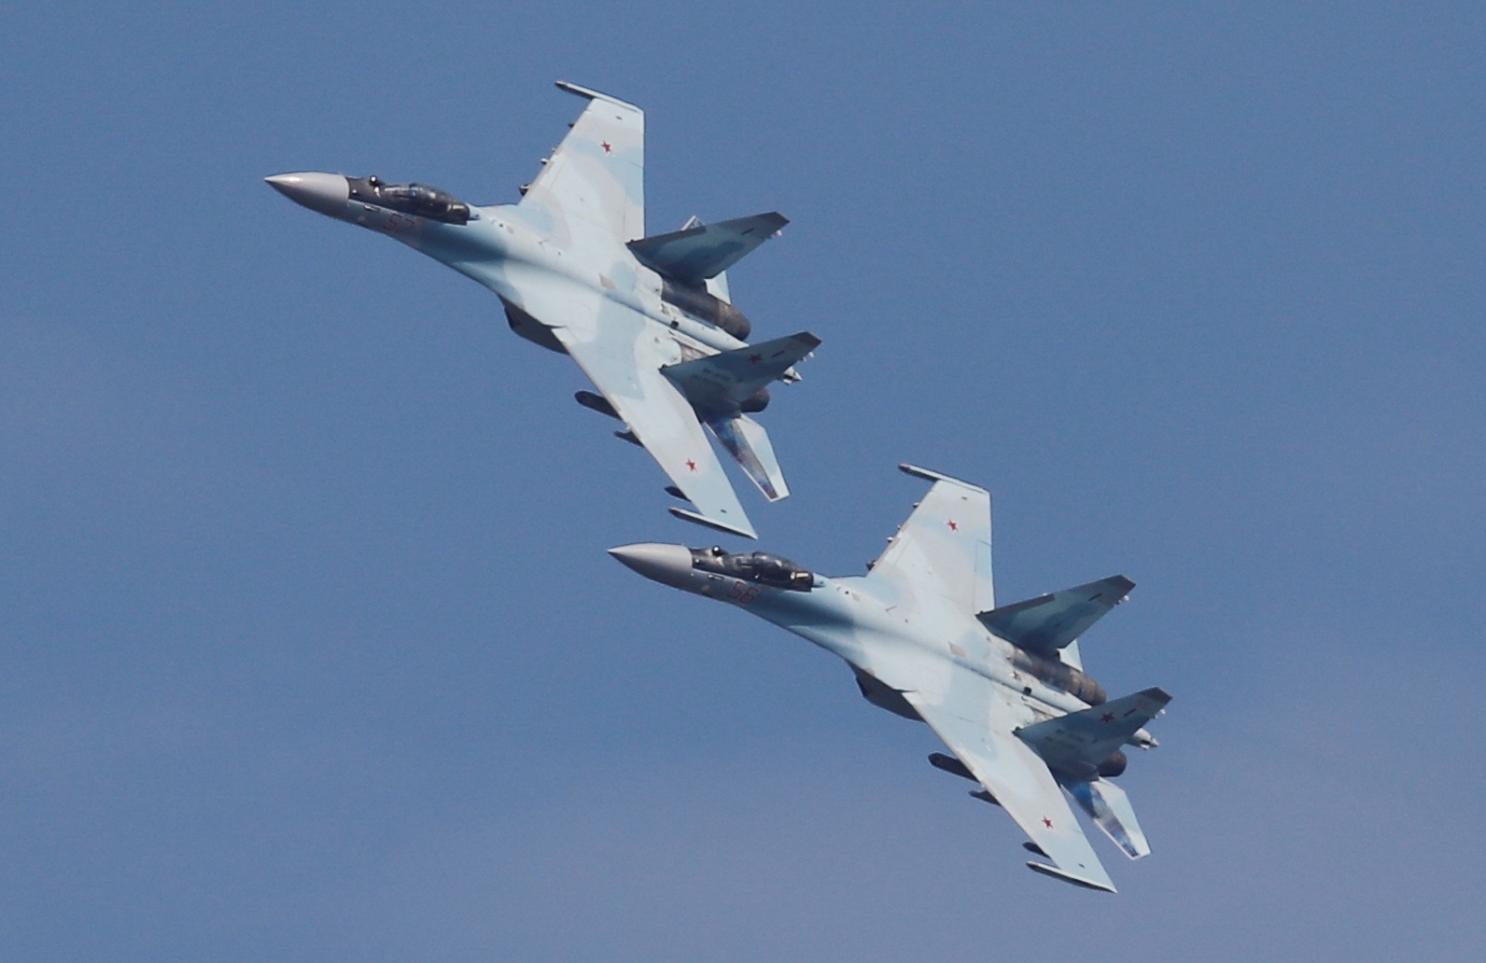 Sukhoi Su-35 Flanker-E Air Superiority Fighter Jets